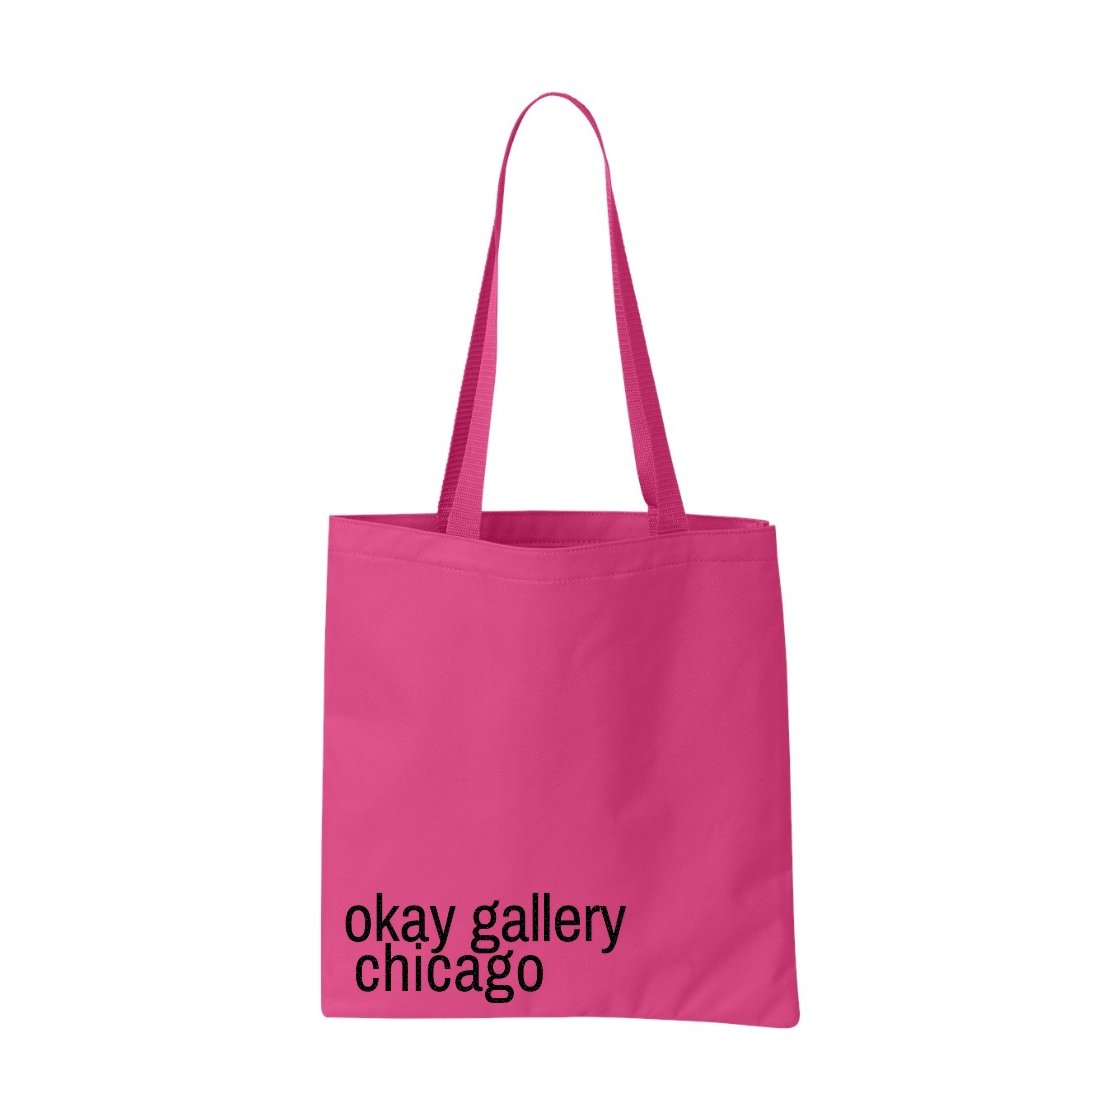 Image of okay gallery chicago Classic Tote Bag Pink